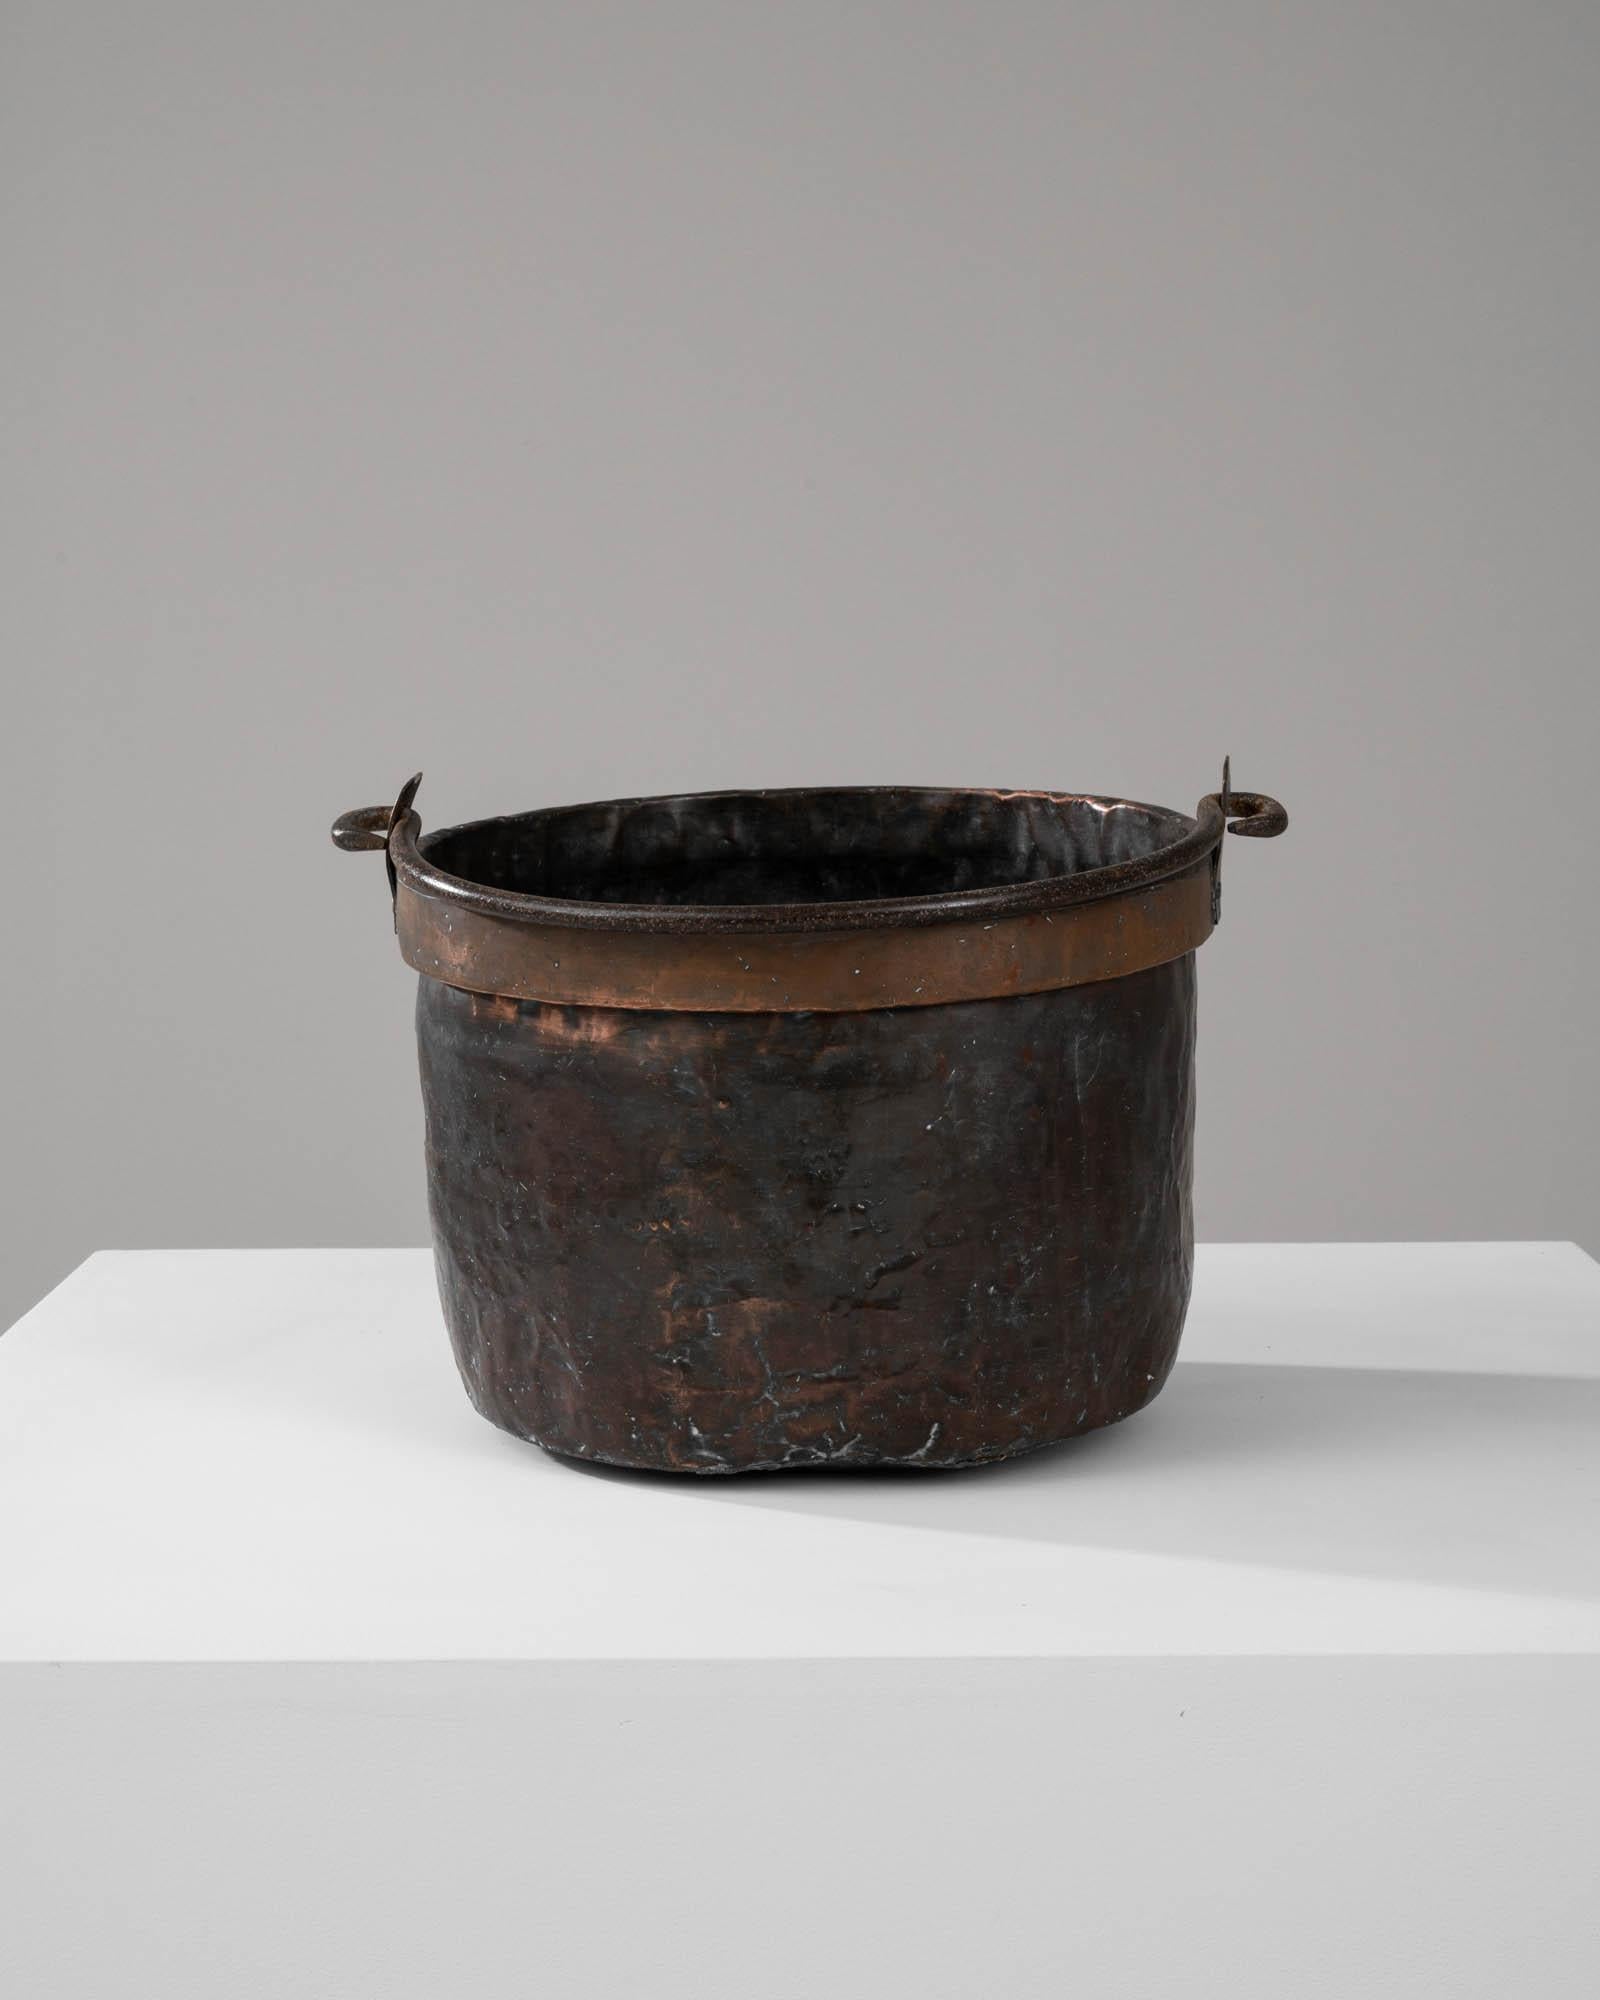 Unearth the rustic allure of this Early 19th Century French Brass Bucket, a striking testament to enduring craftsmanship. This robust container has been forged from brass, a material prized for its resilience and distinct golden hue that has now